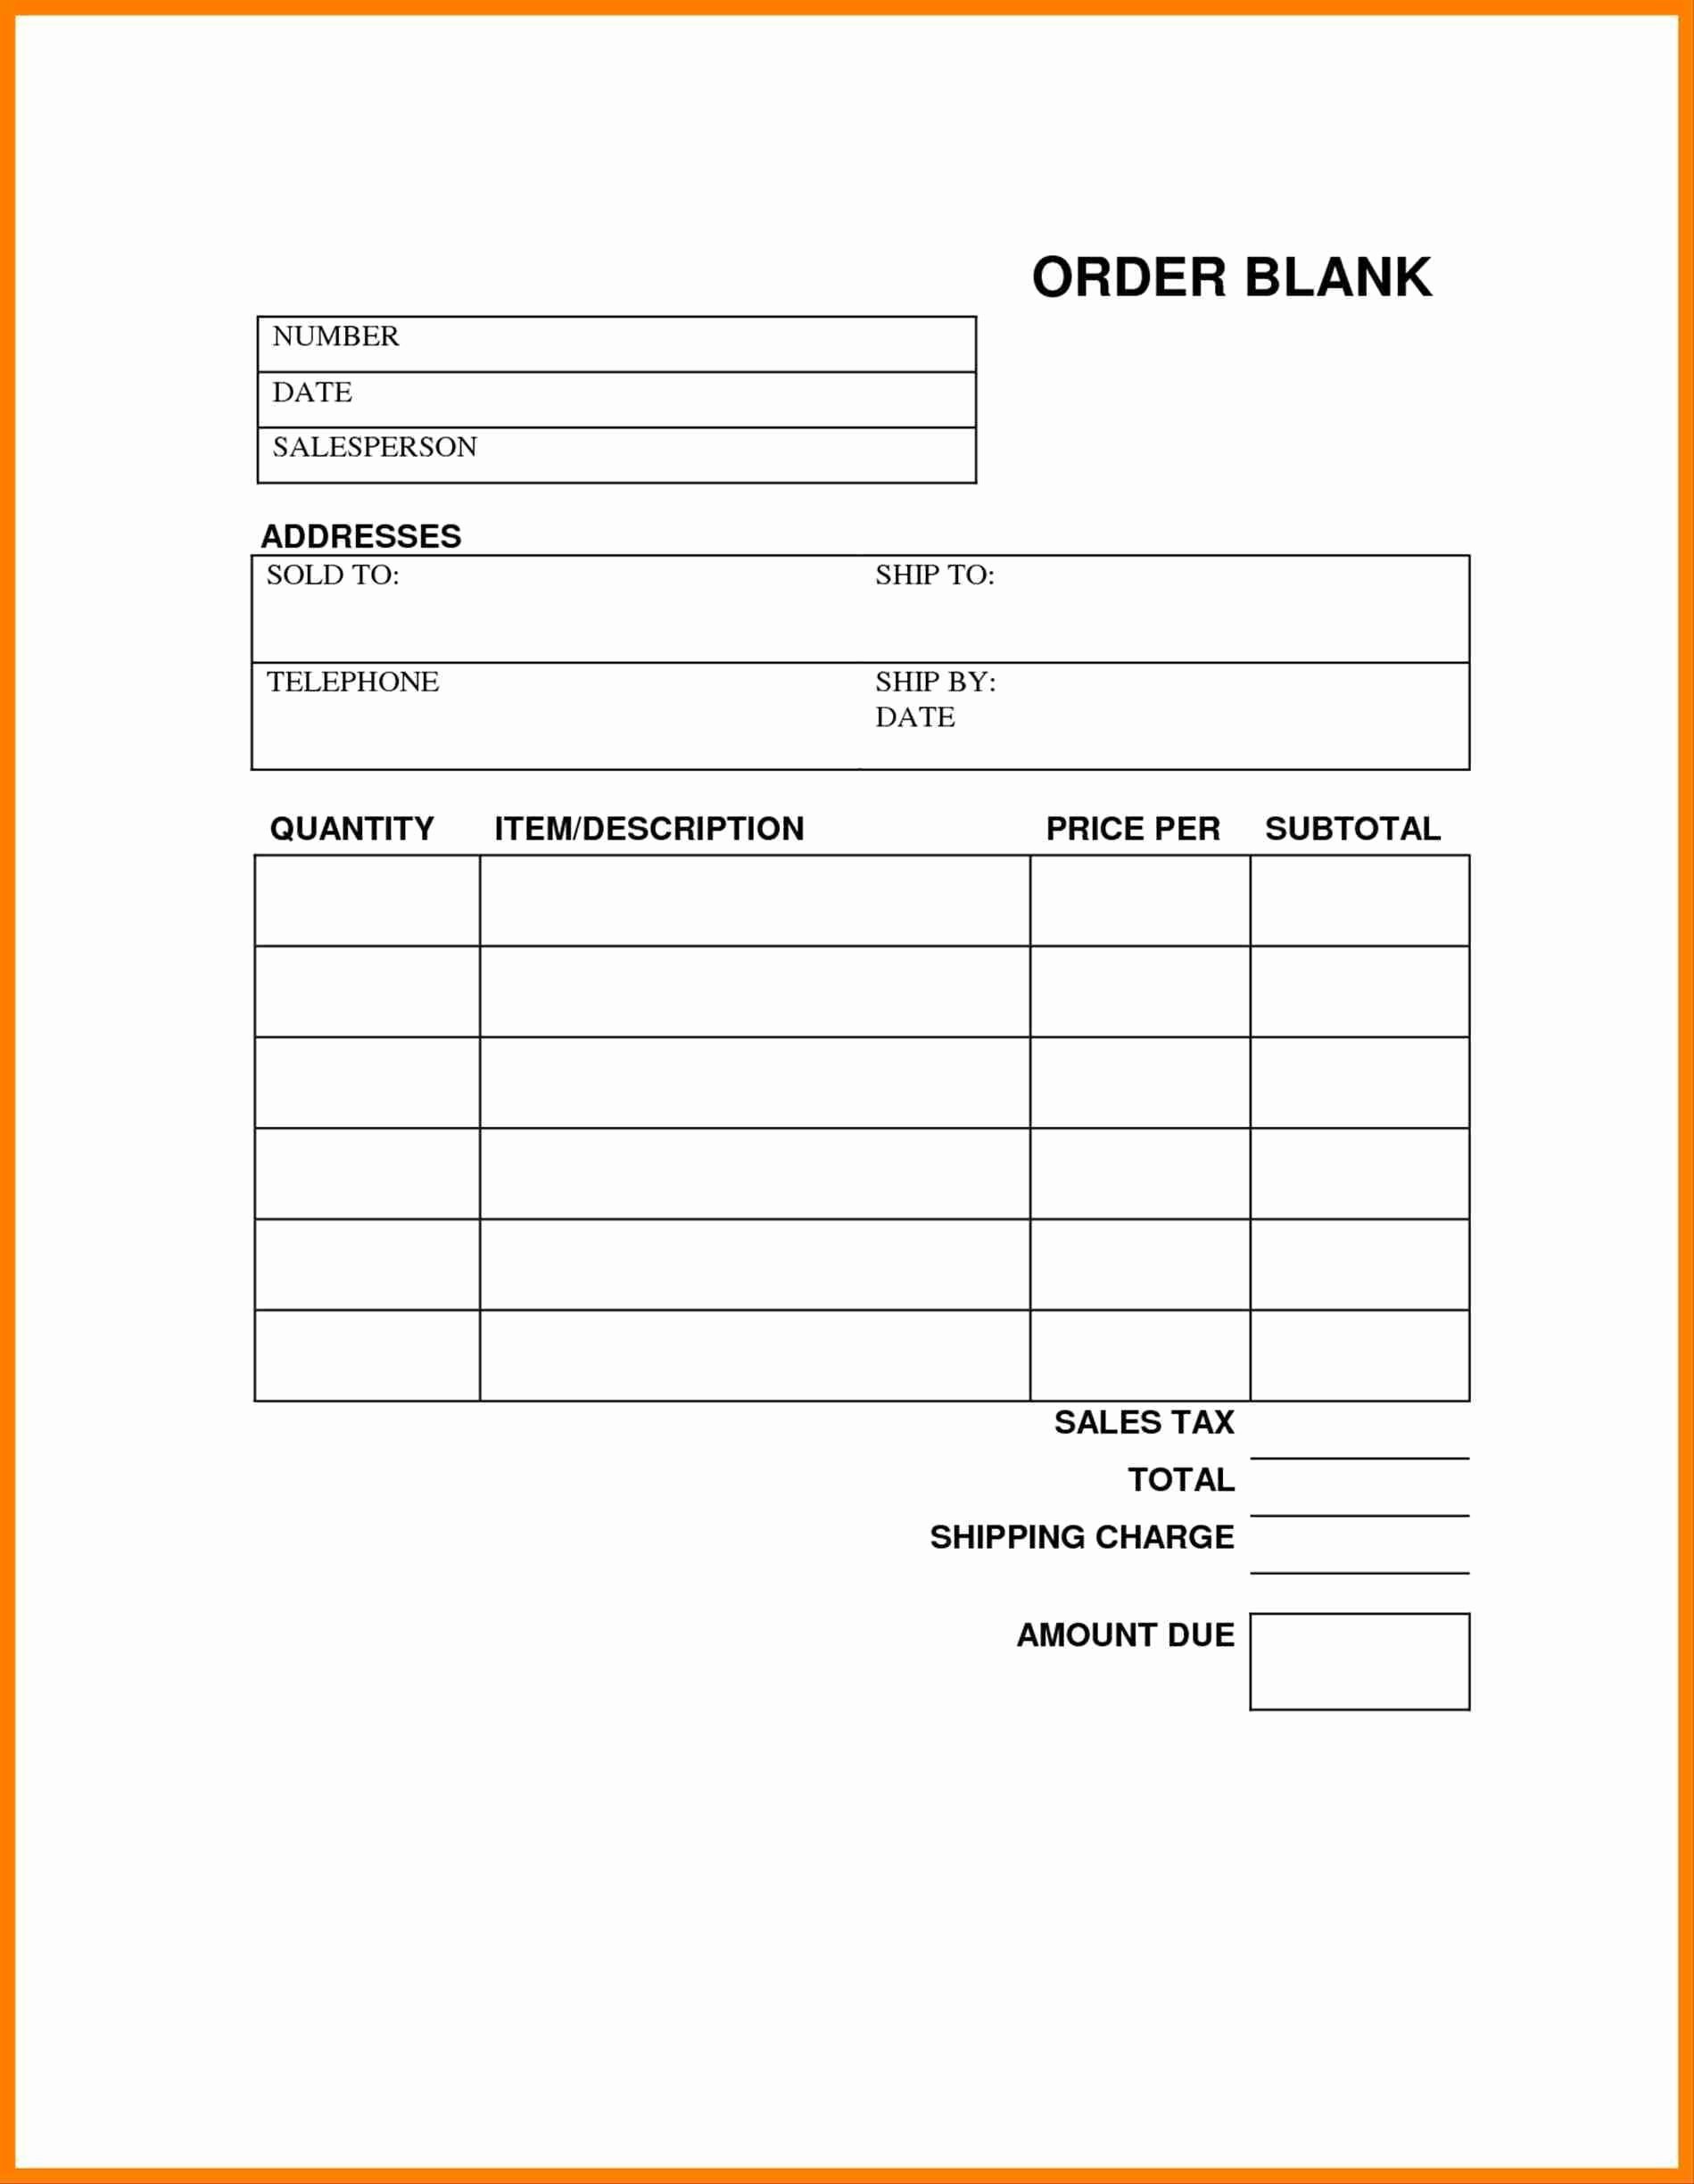 Online order form Template Awesome Blank order forms Templates Free